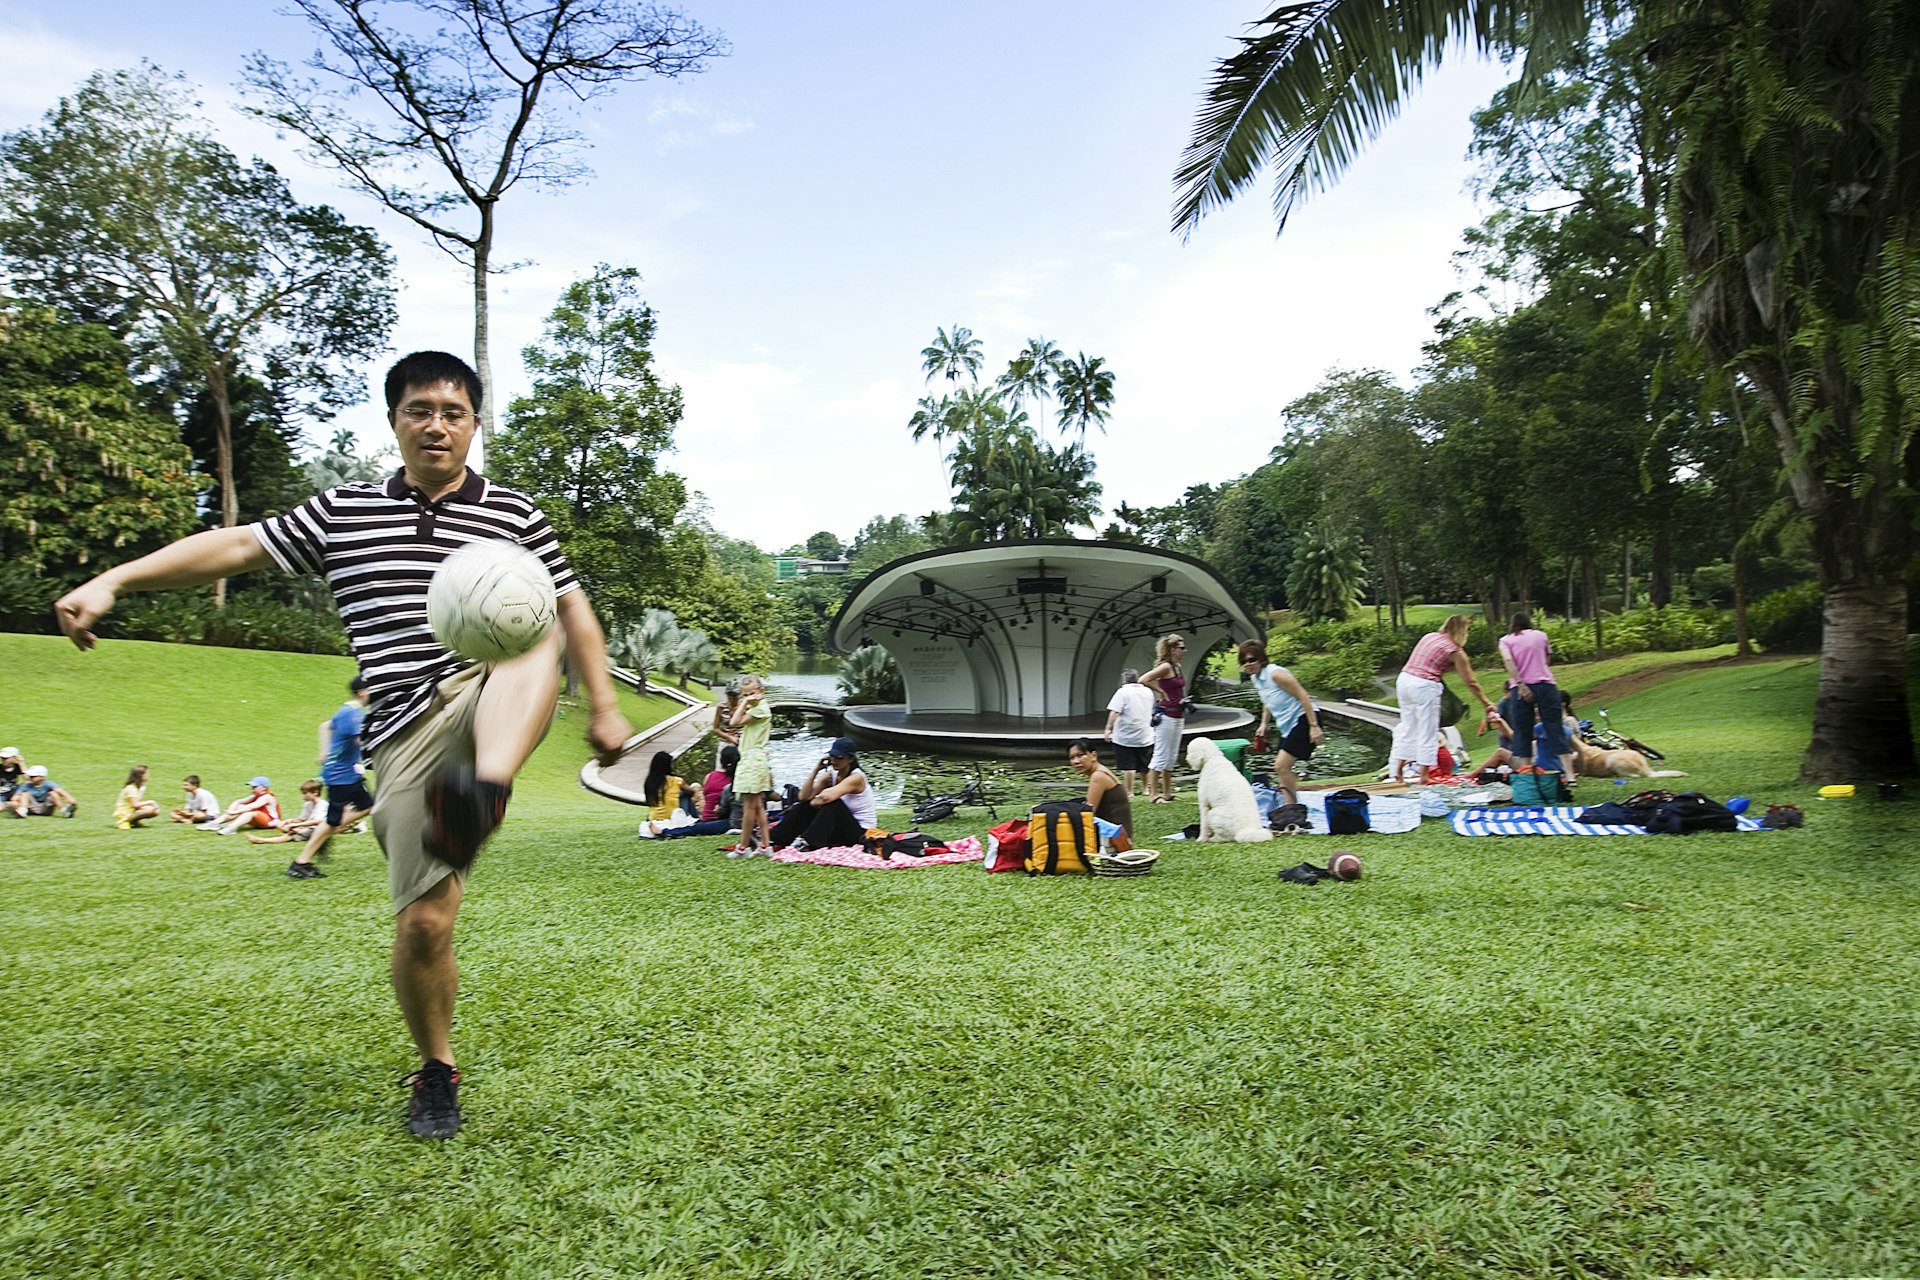 A man kicks a football while people picnic in the background at Singapore Botanic Gardens